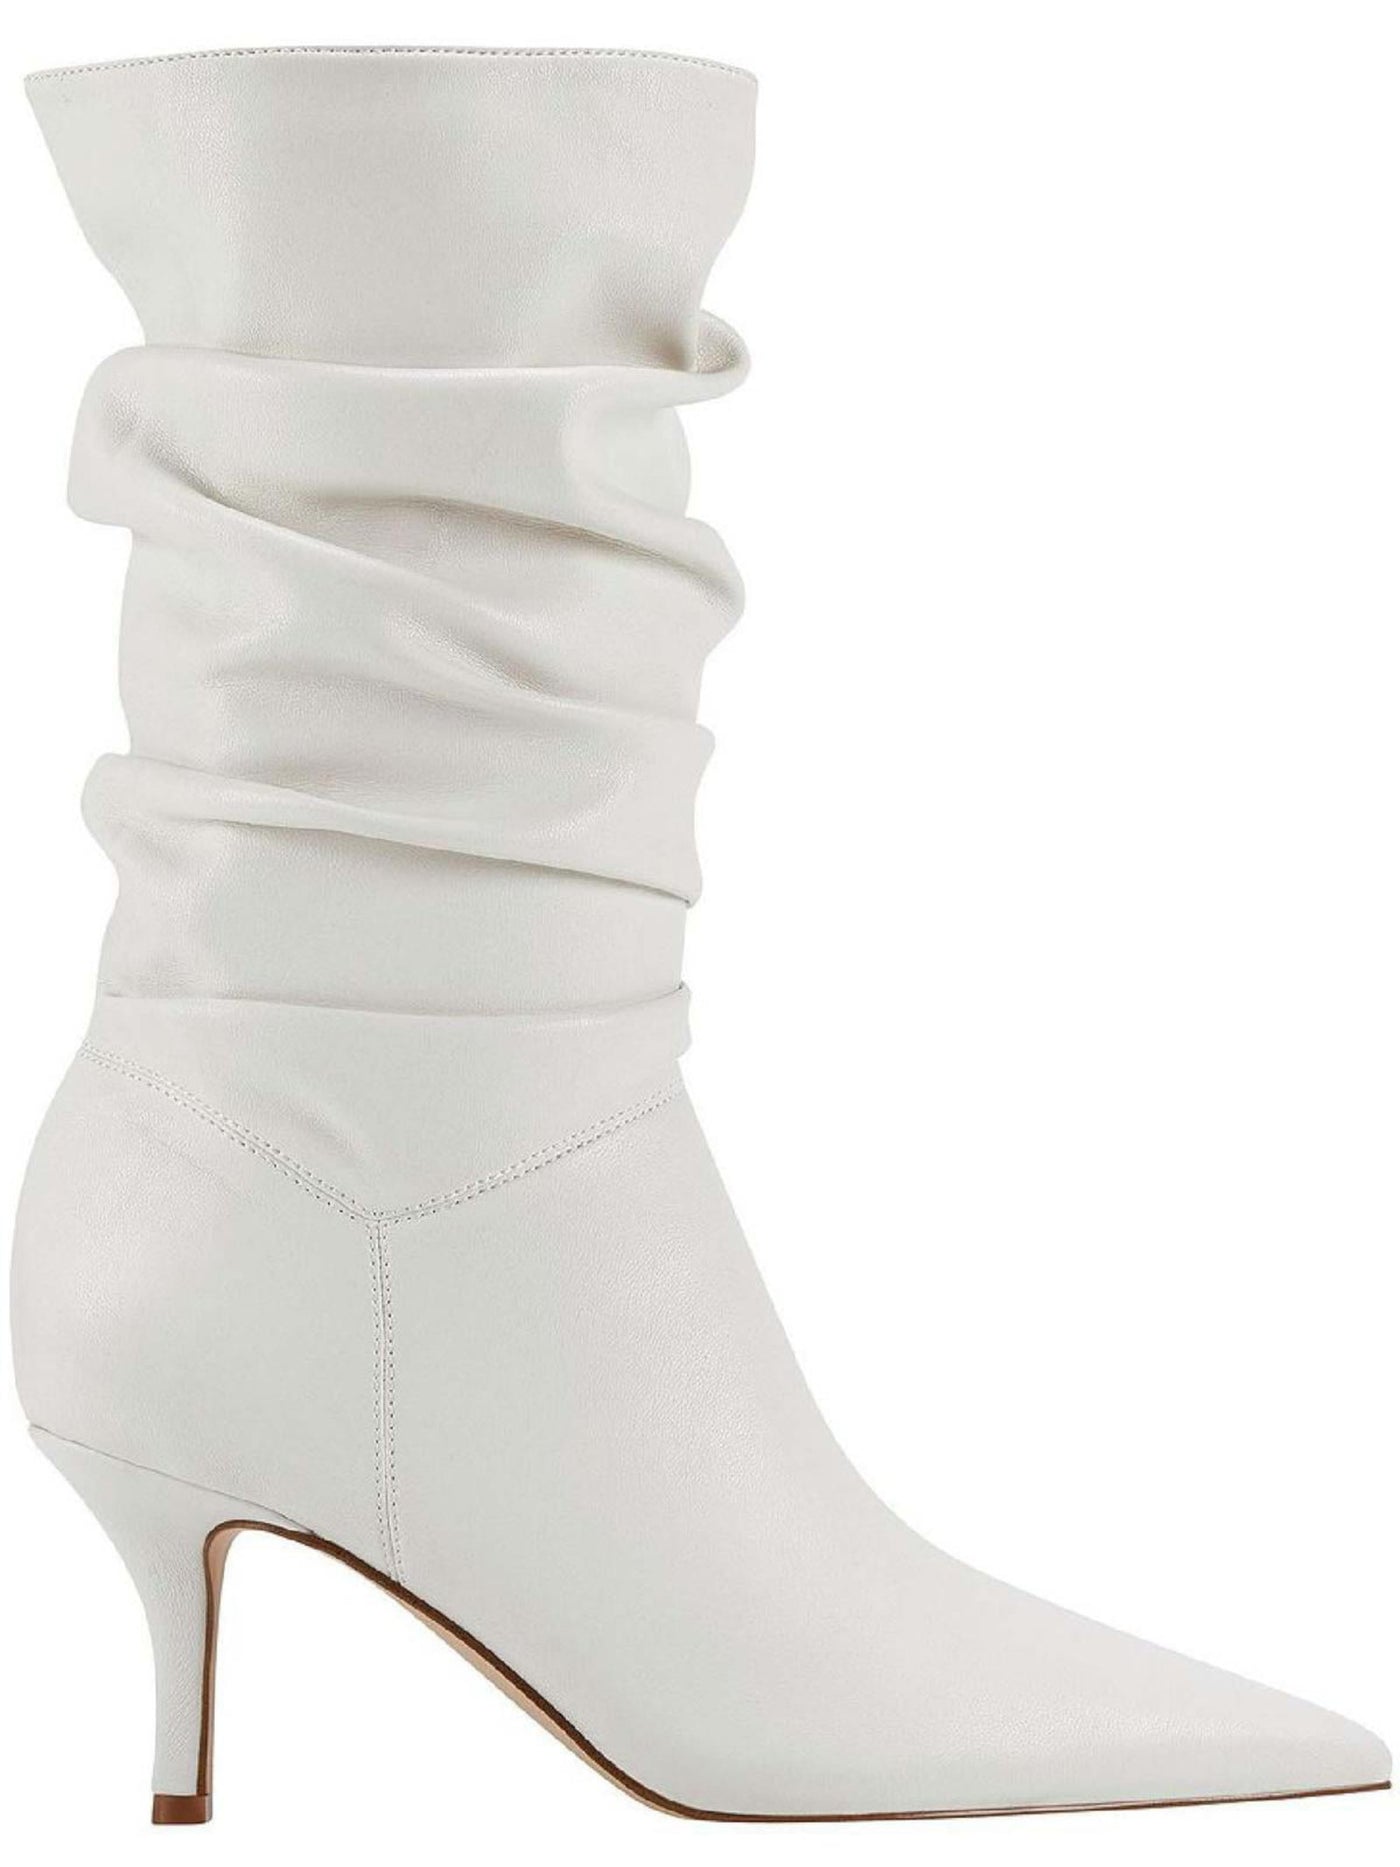 MARC FISHER Womens Ivory Padded Manya Pointed Toe Kitten Heel Slouch Boot 5.5 M